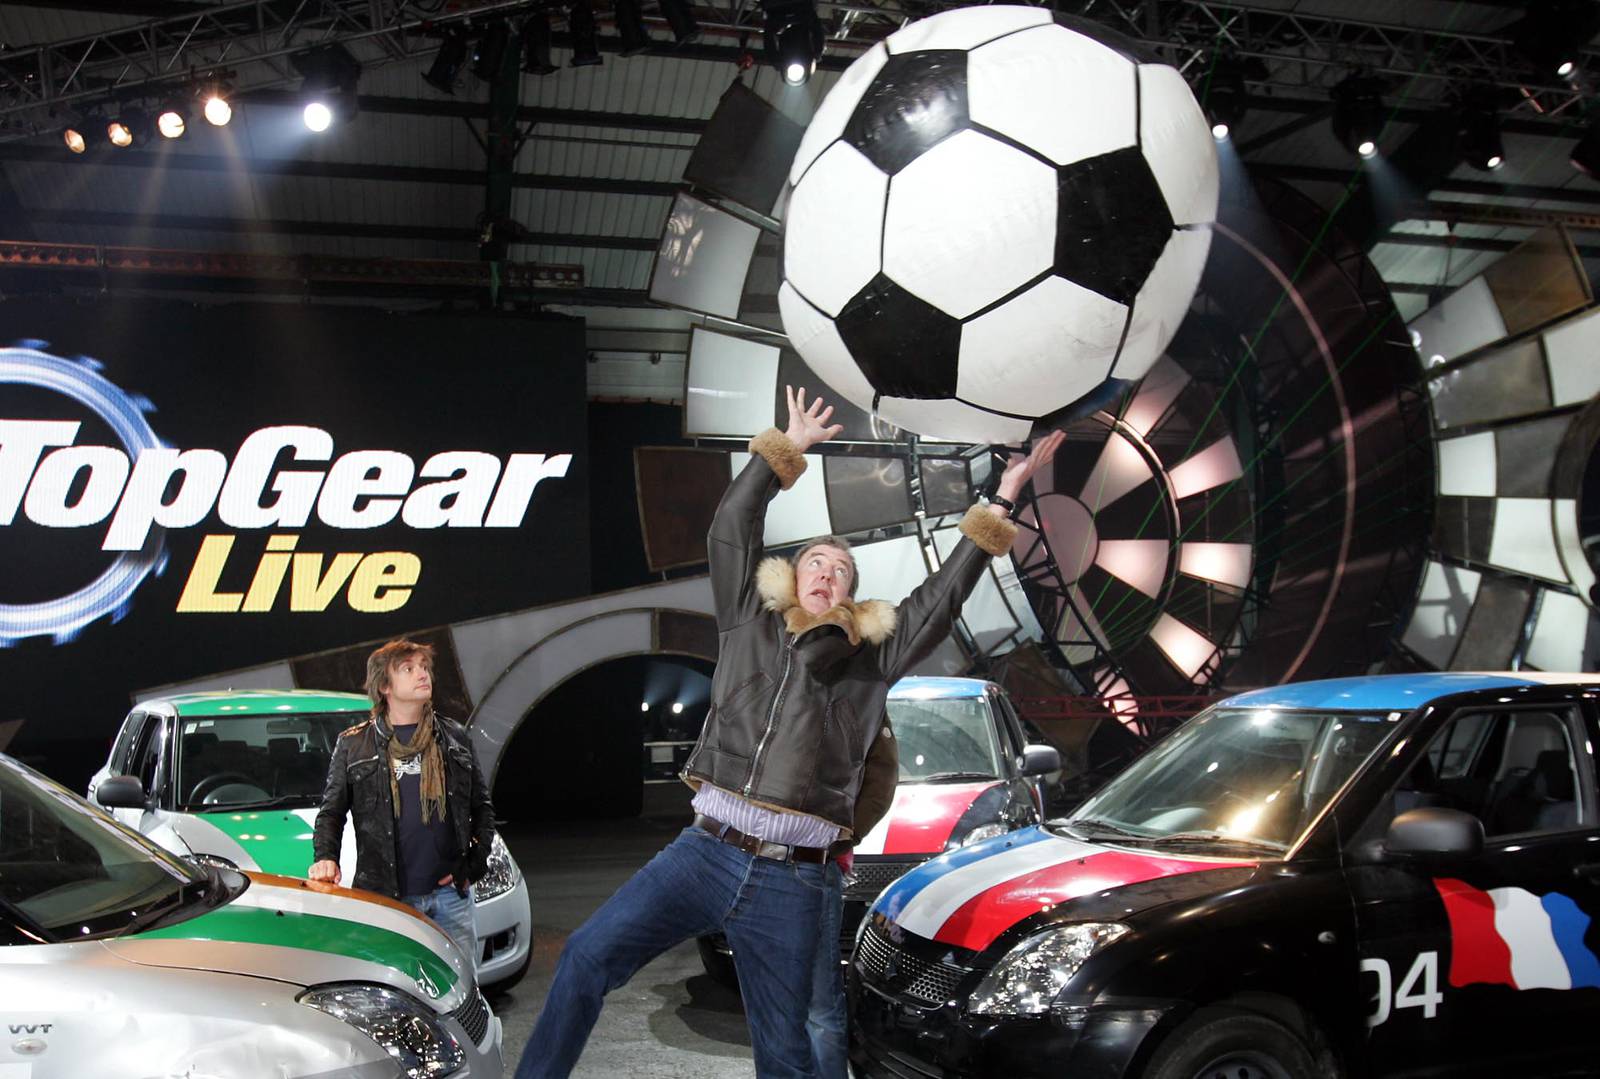 Top Gear cancelled often farcical saga of the show’s decline has